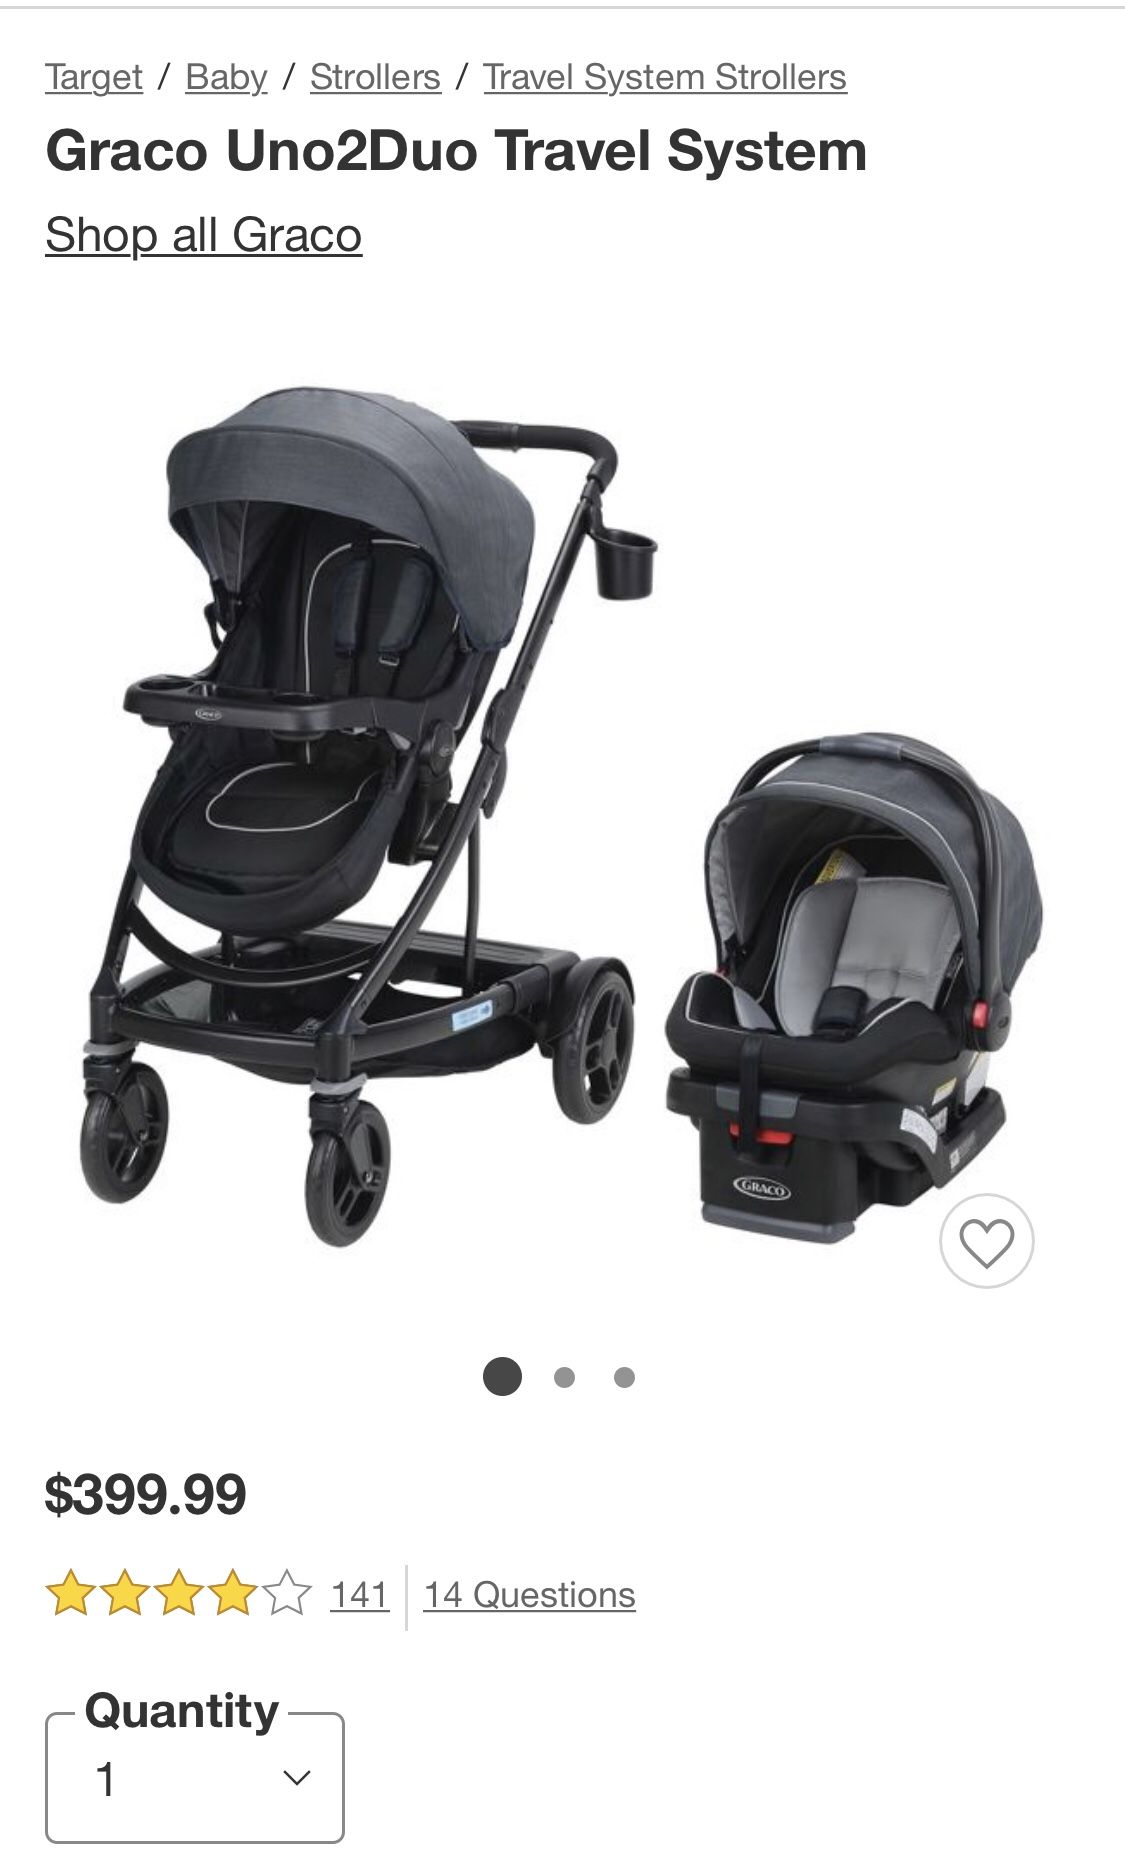 Graco Uno2Duo Travel System